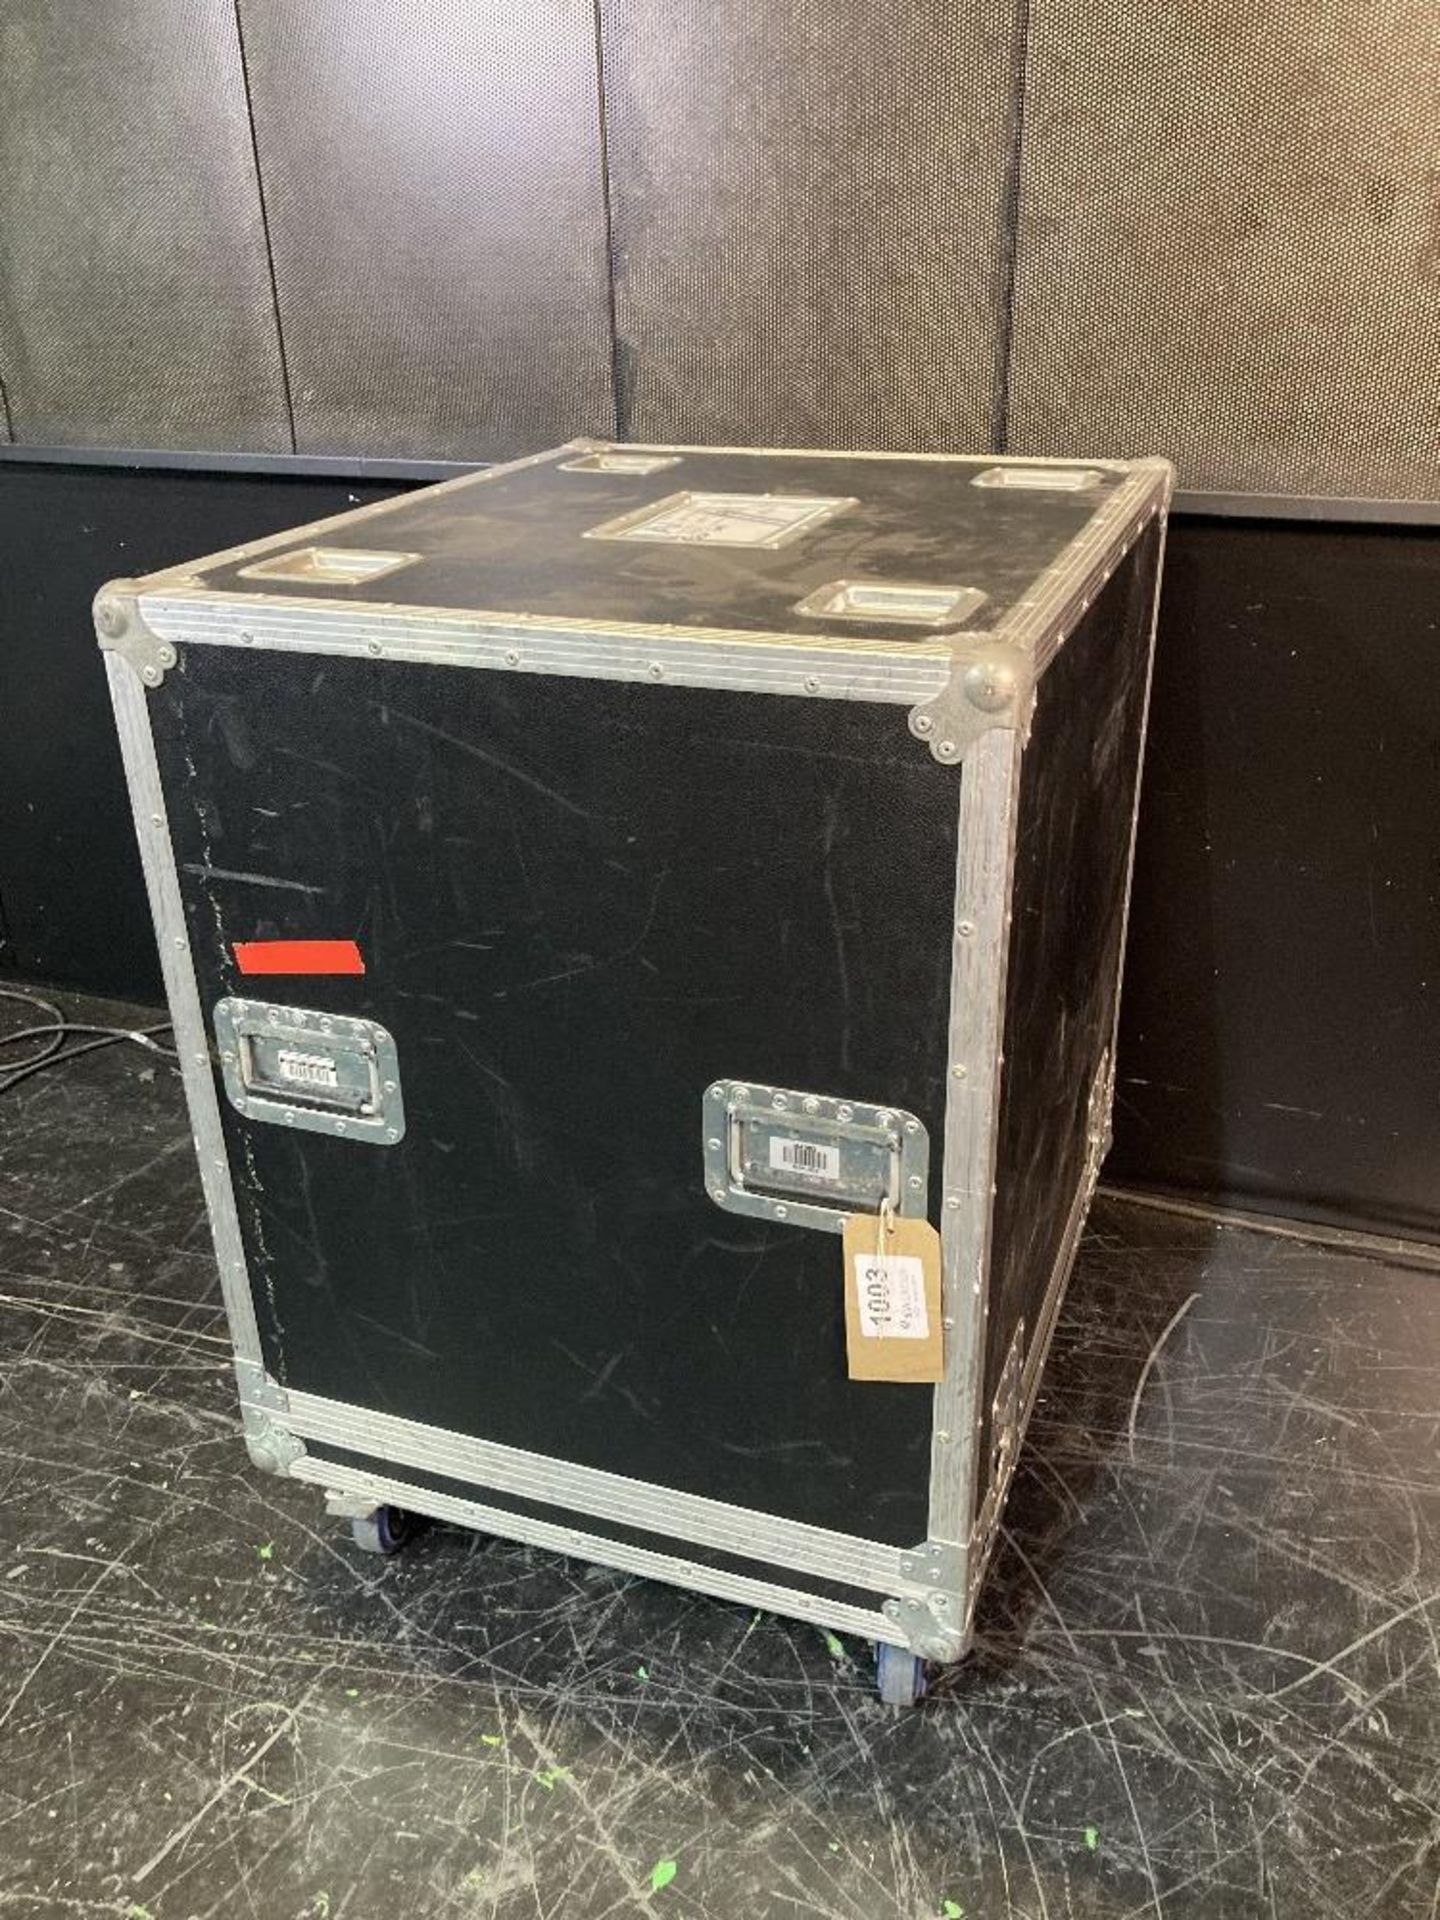 RCF 8004-AS Powered Subwoofer & Heavy Duty Mobile Flight Case - Image 10 of 10